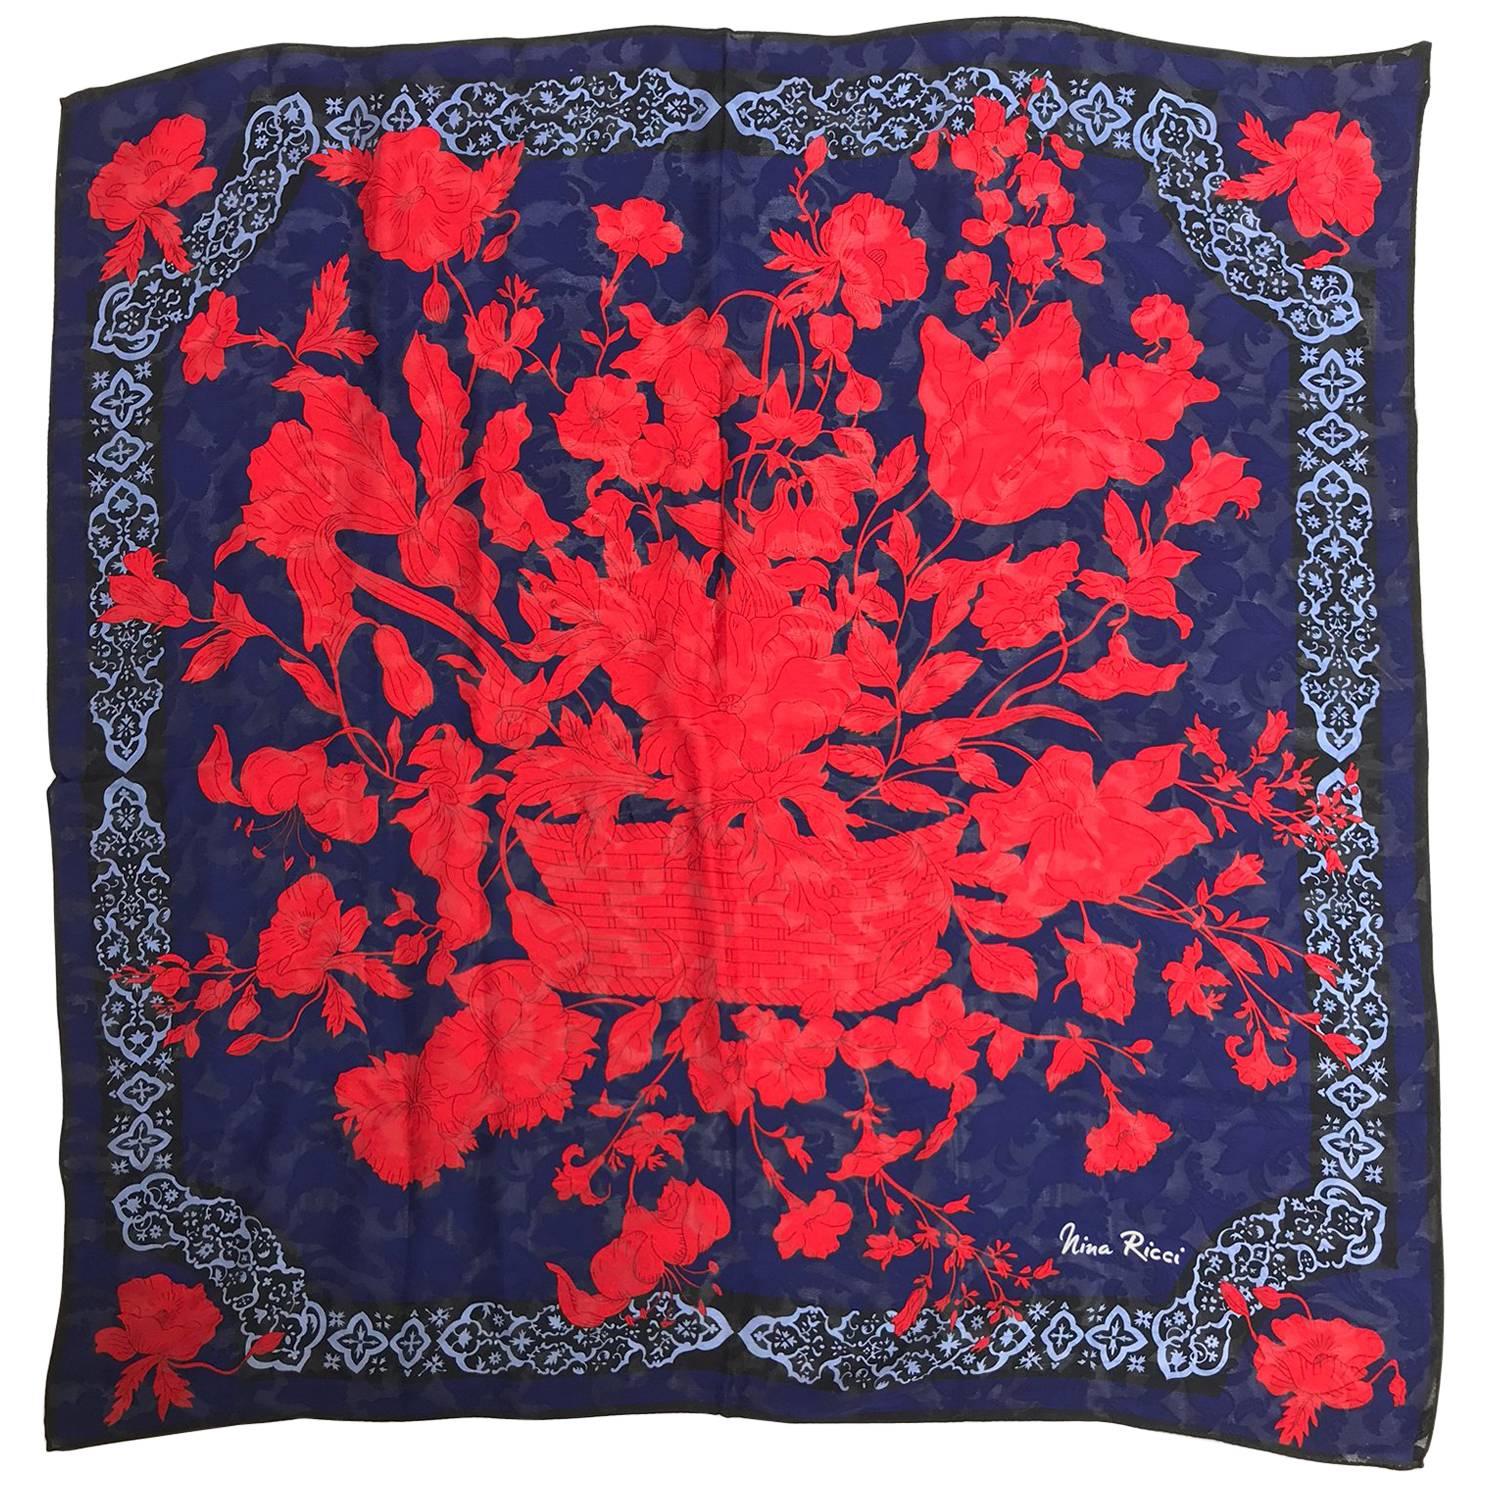 Nina Ricci red and blue floral silk scarf 35" x 35"